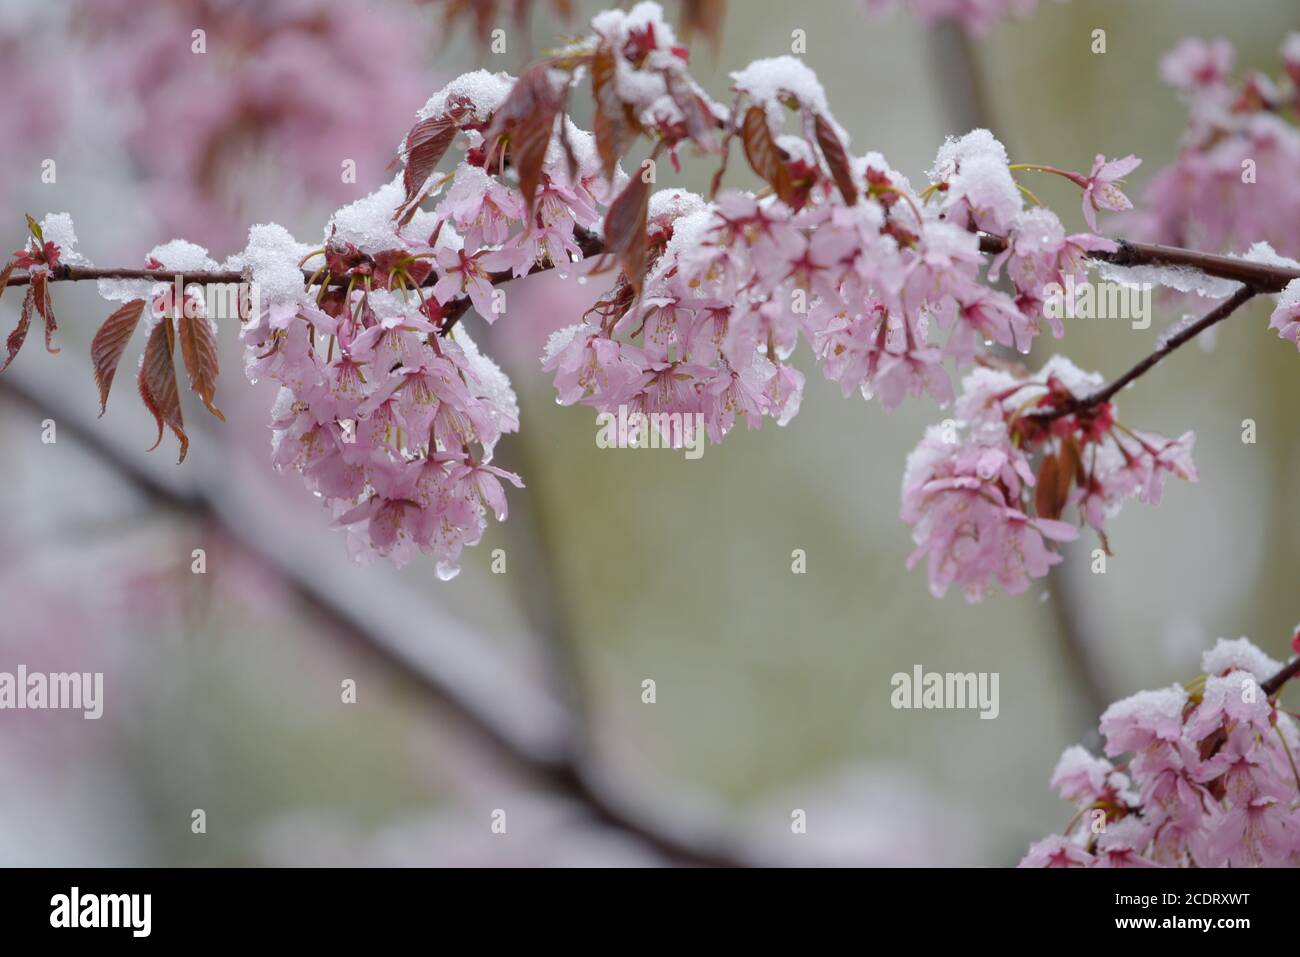 Cherry tree flowers and branches covered with melting wet snow during sudden and unexpected snow storm in May in Helsinki, Finland. Stock Photo